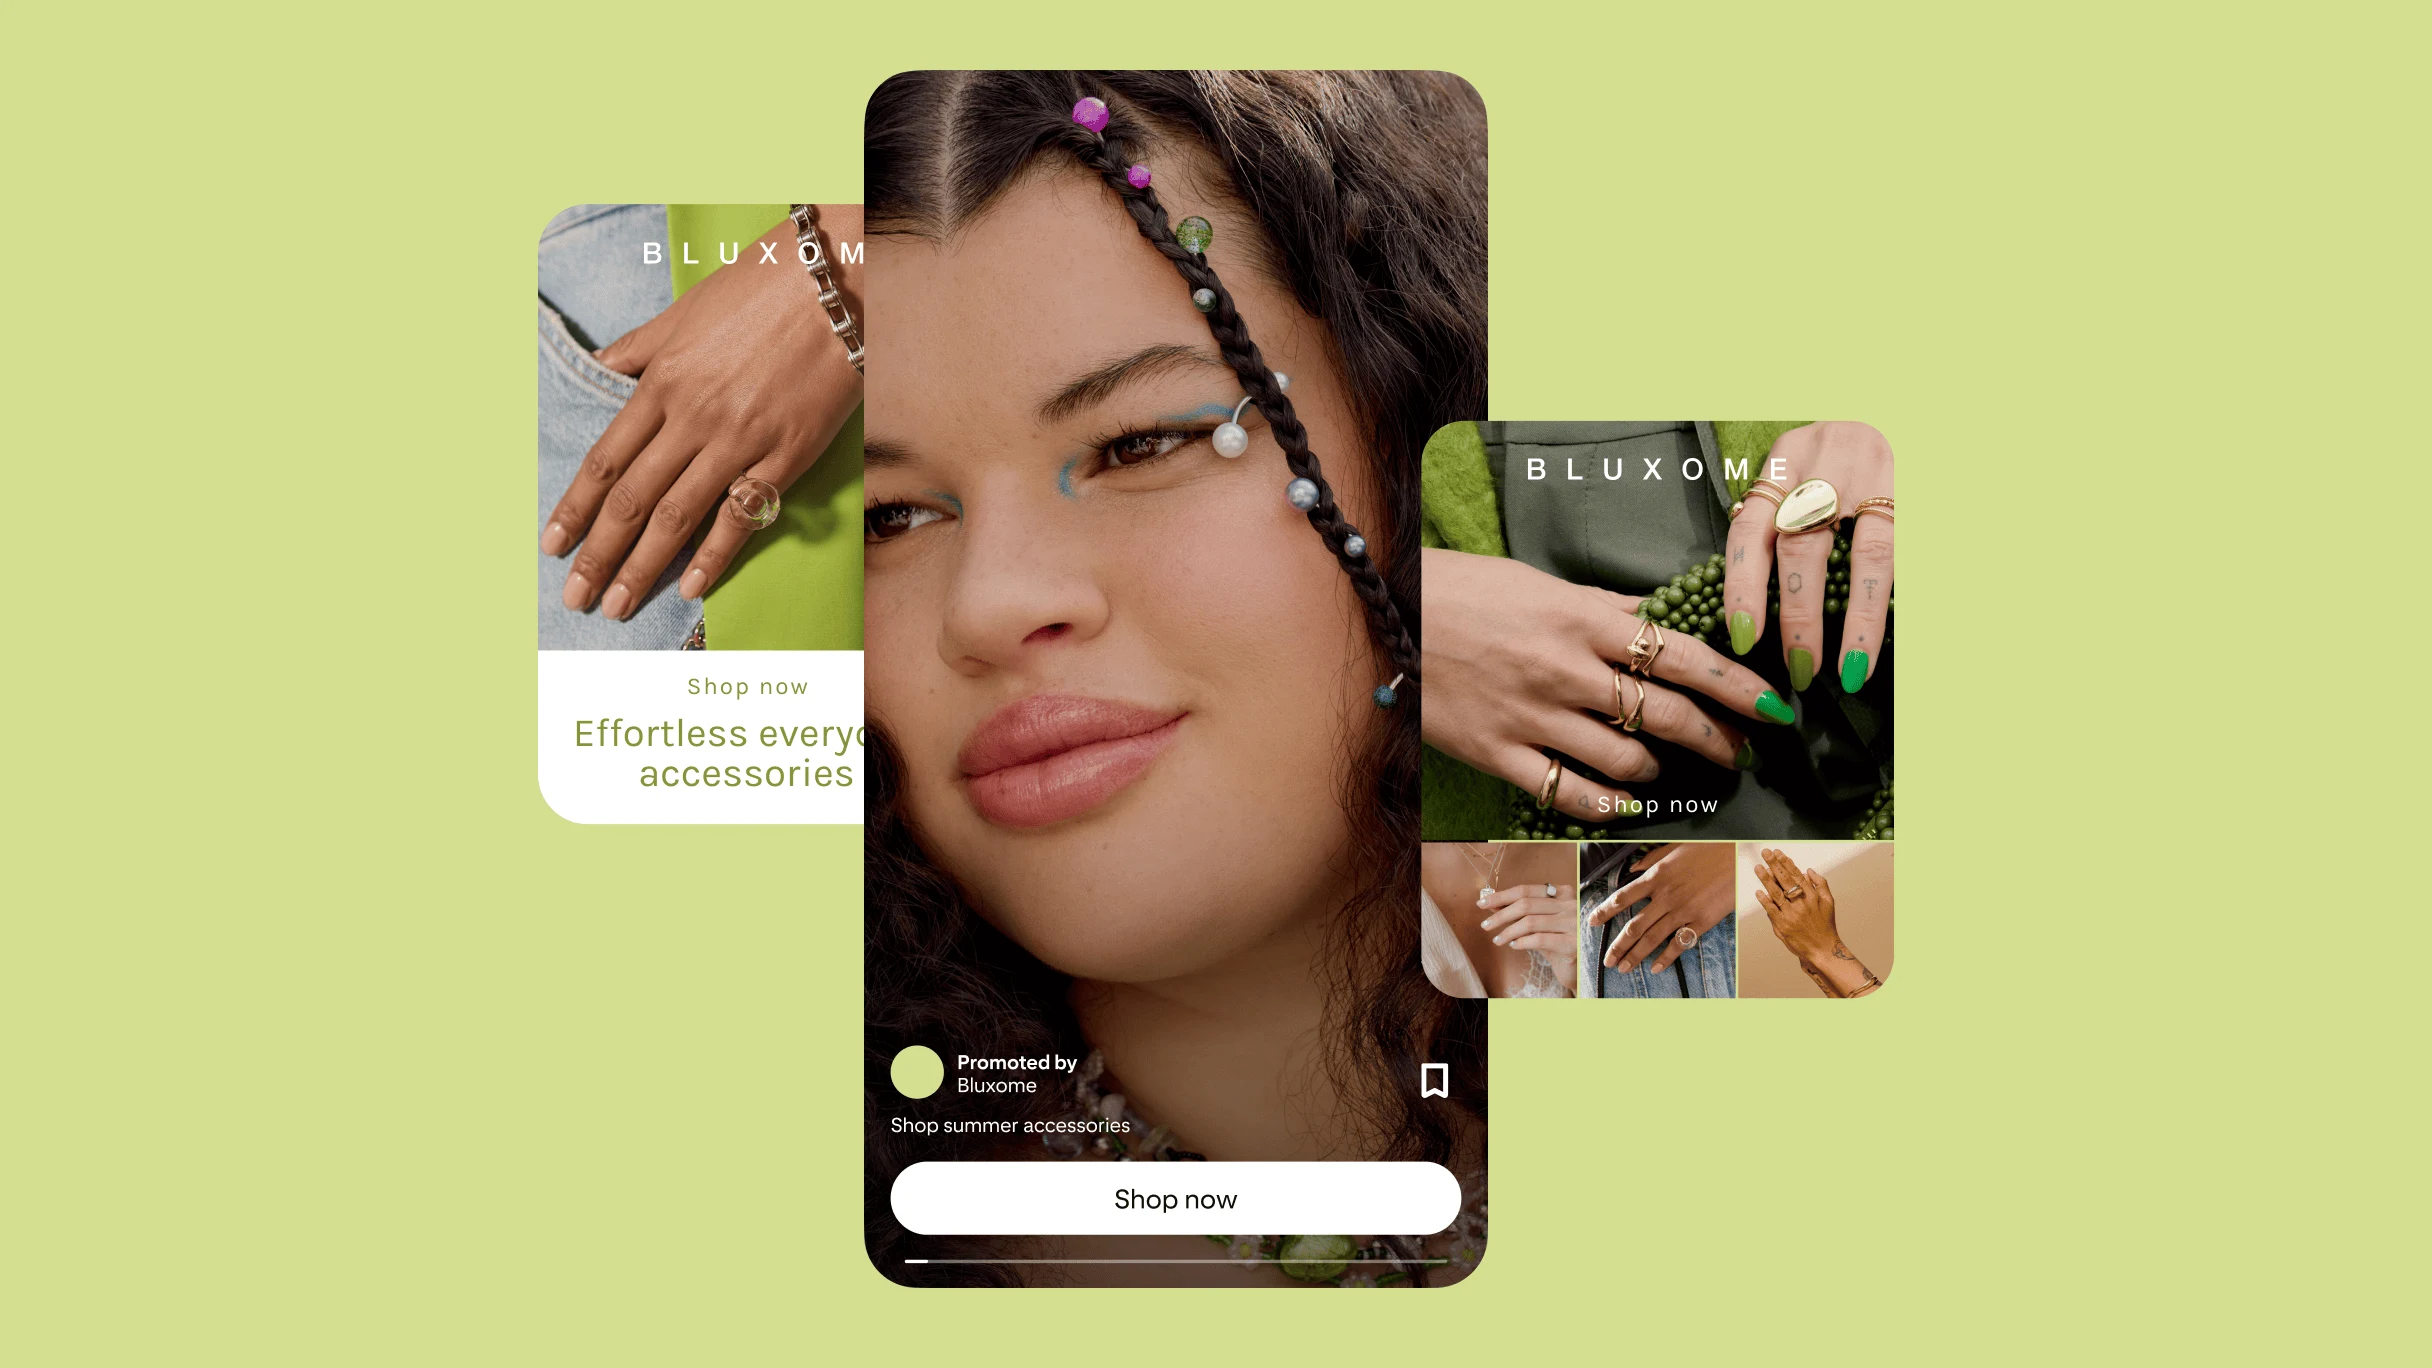 Three ads on a green background: The first features a hand with a bracelet and ring in a jeans pocket; the second displays a close-up of a woman's face with a braid and accessories; the third shows four images, each highlighting various rings.